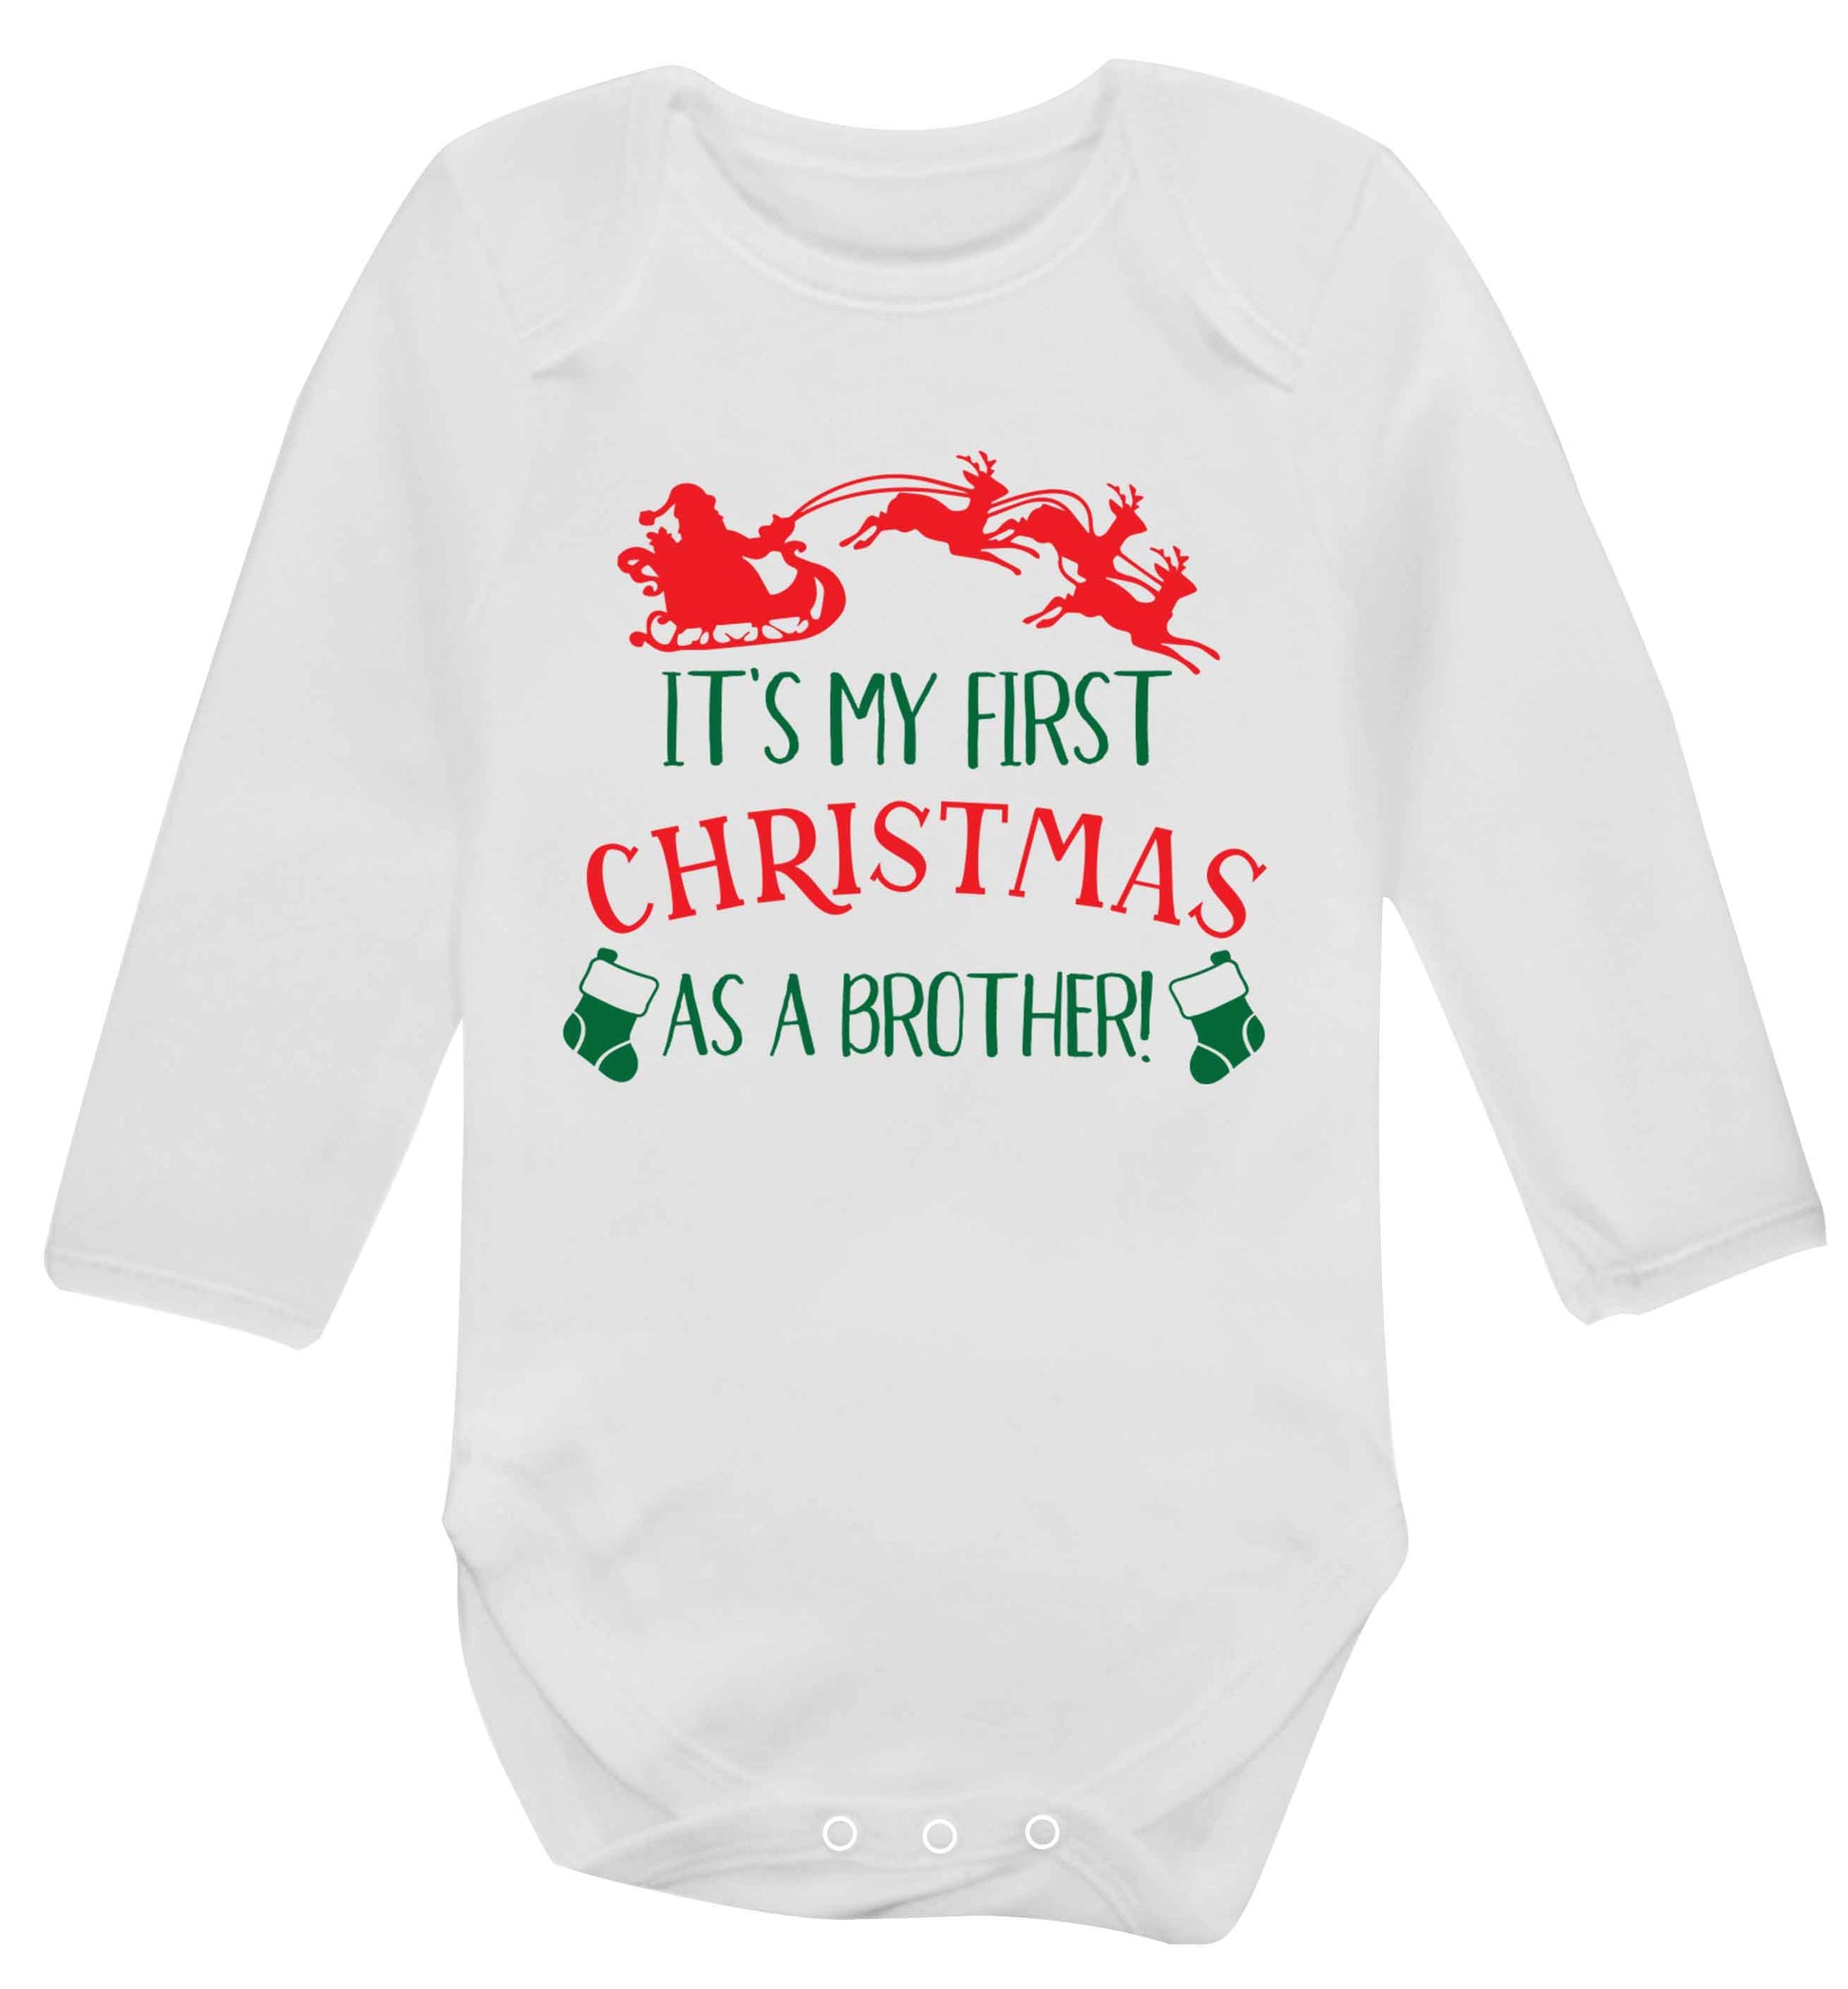 It's my first Christmas as a brother! Baby Vest long sleeved white 6-12 months